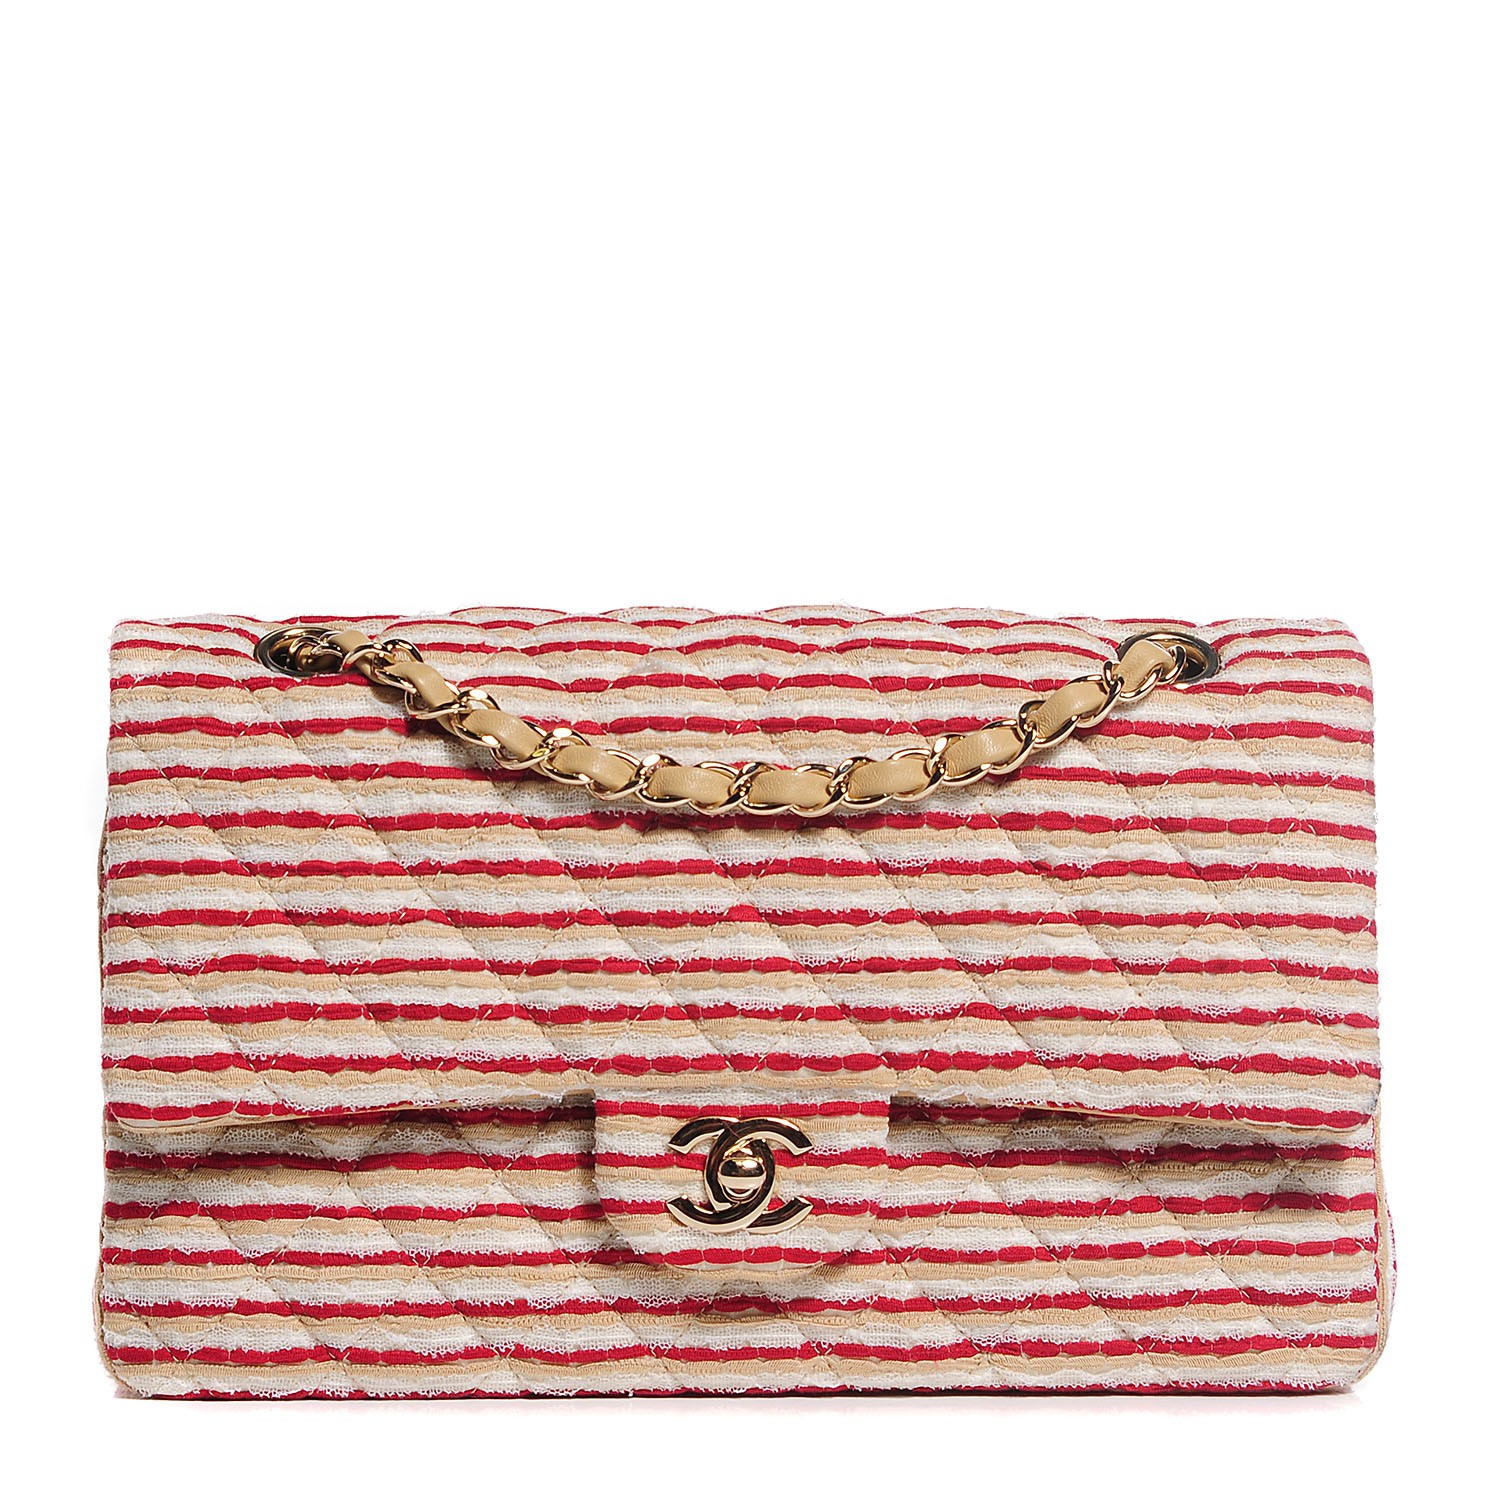 CHANEL Jersey Quilted Medium Coco Sailor Flap Red White 106893